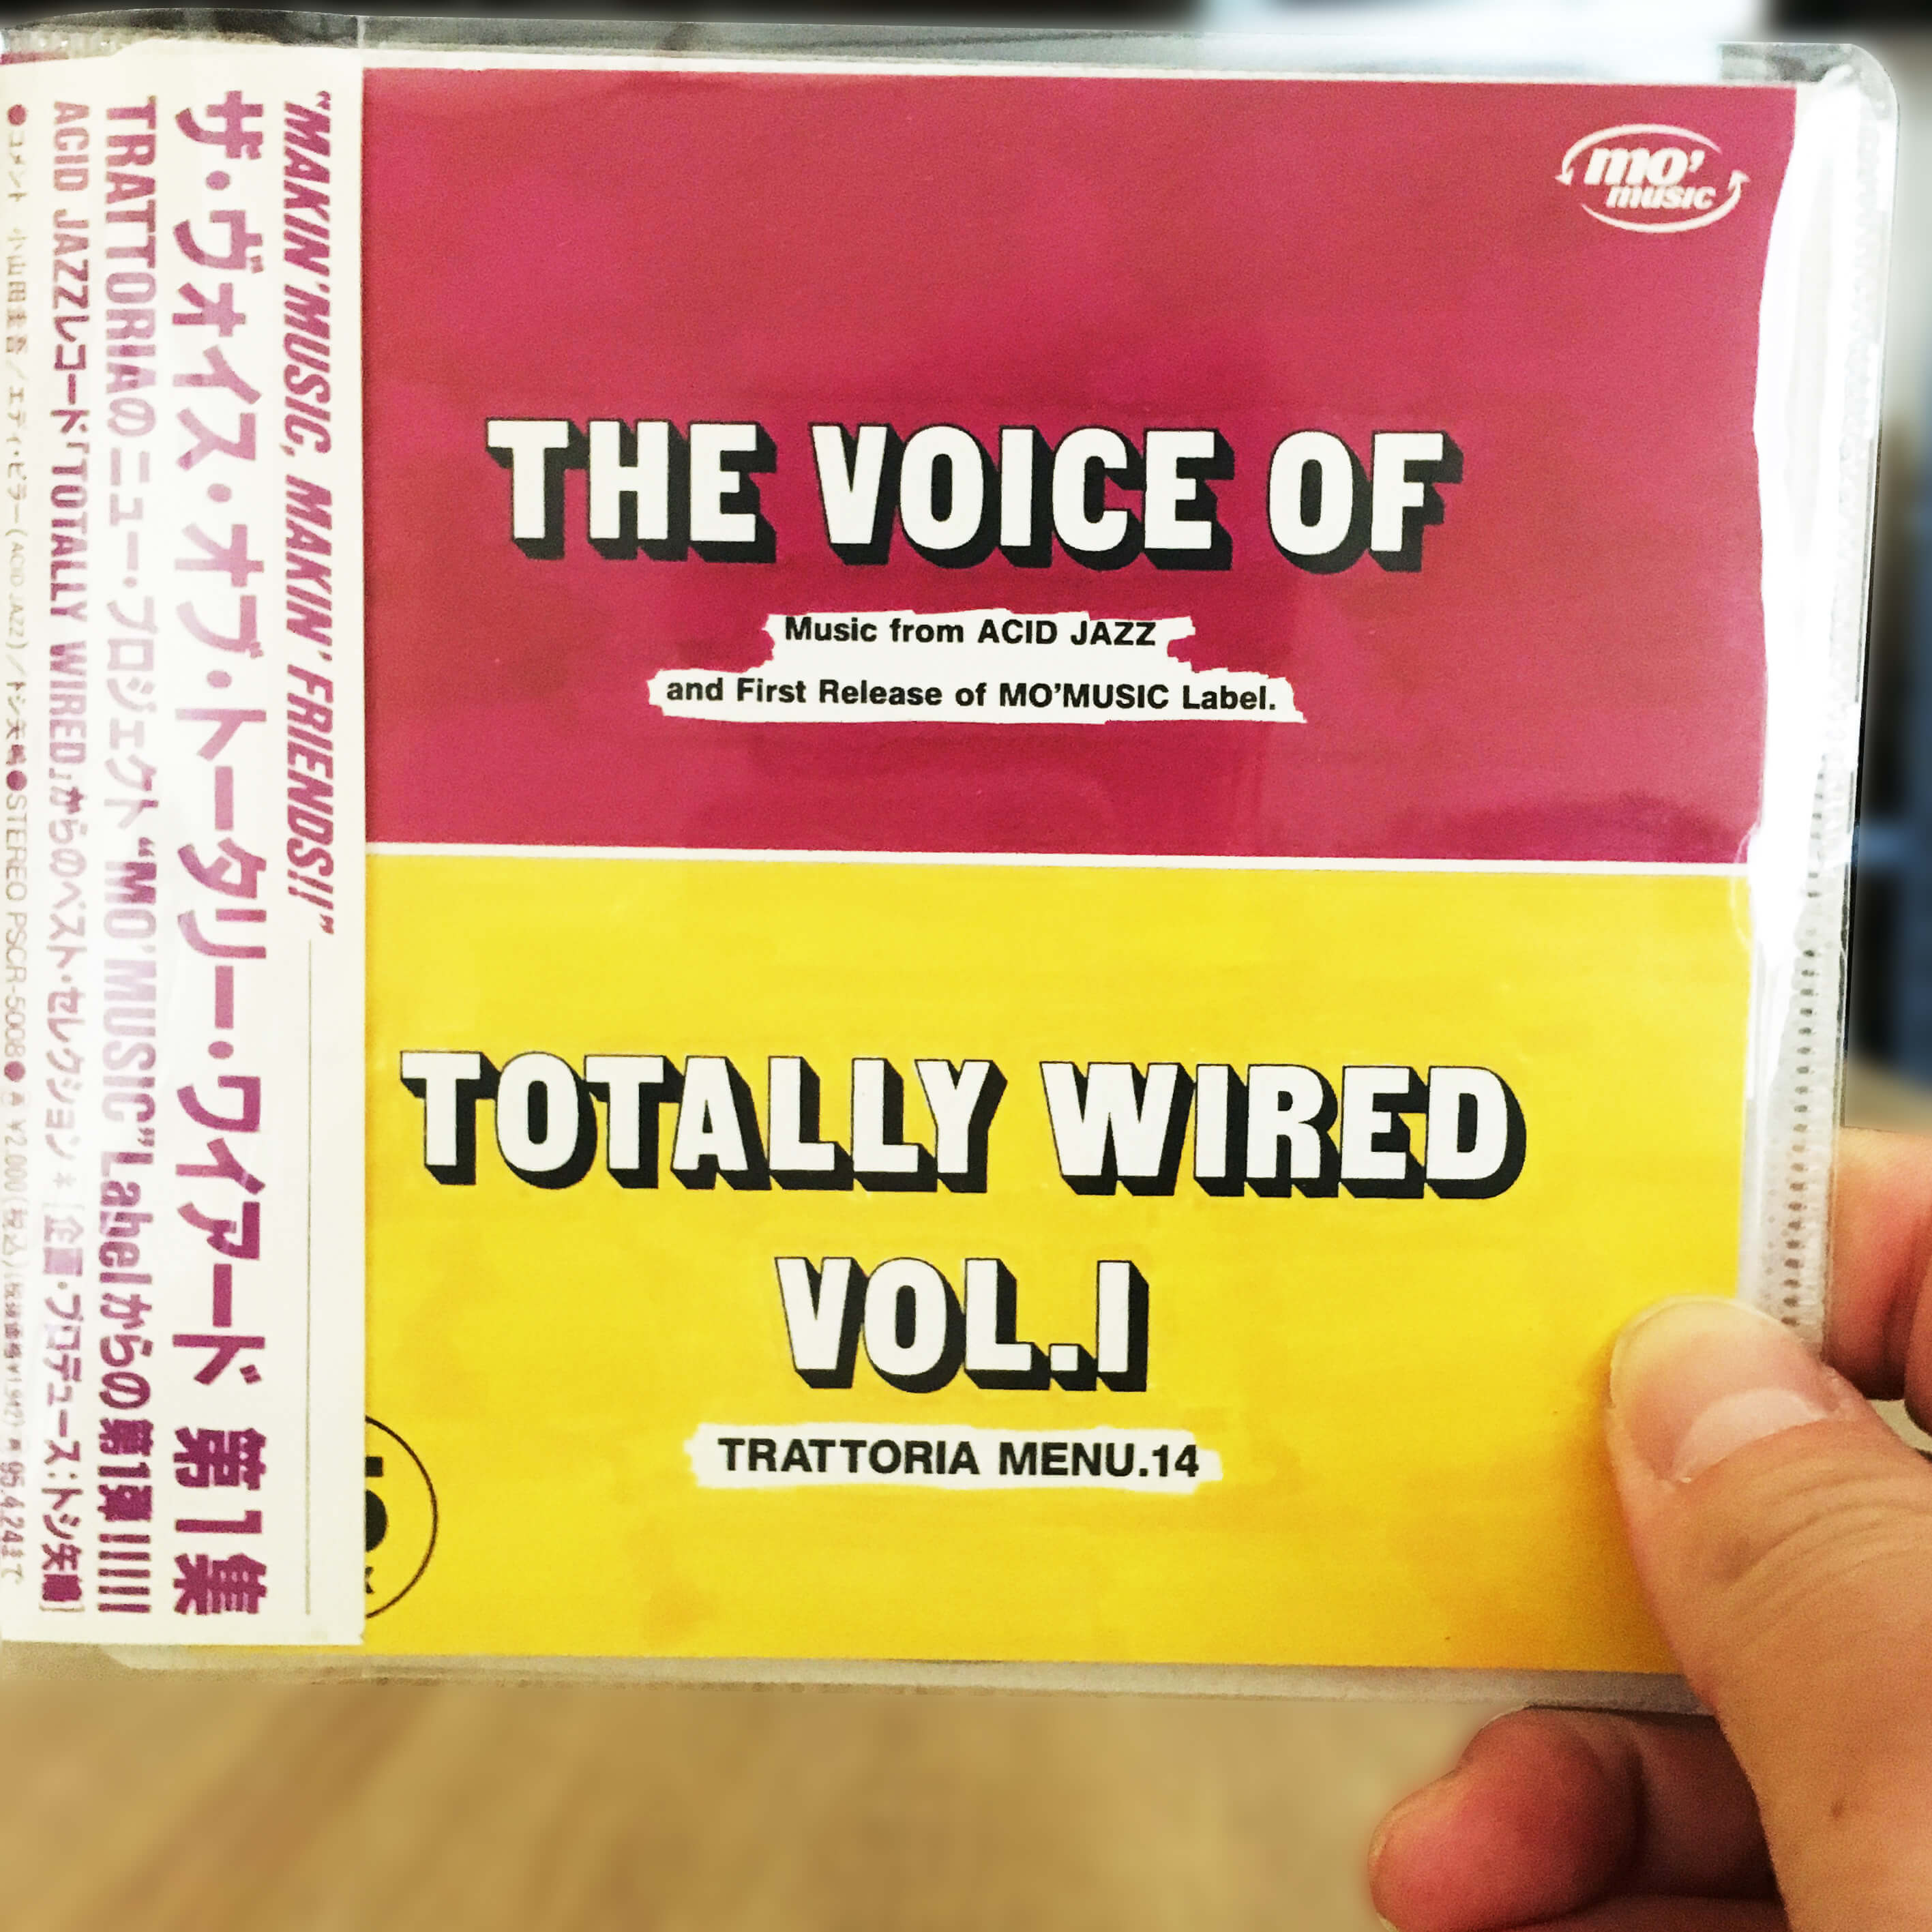 THE VOICE OF TOTALLY WIRED Vol.1